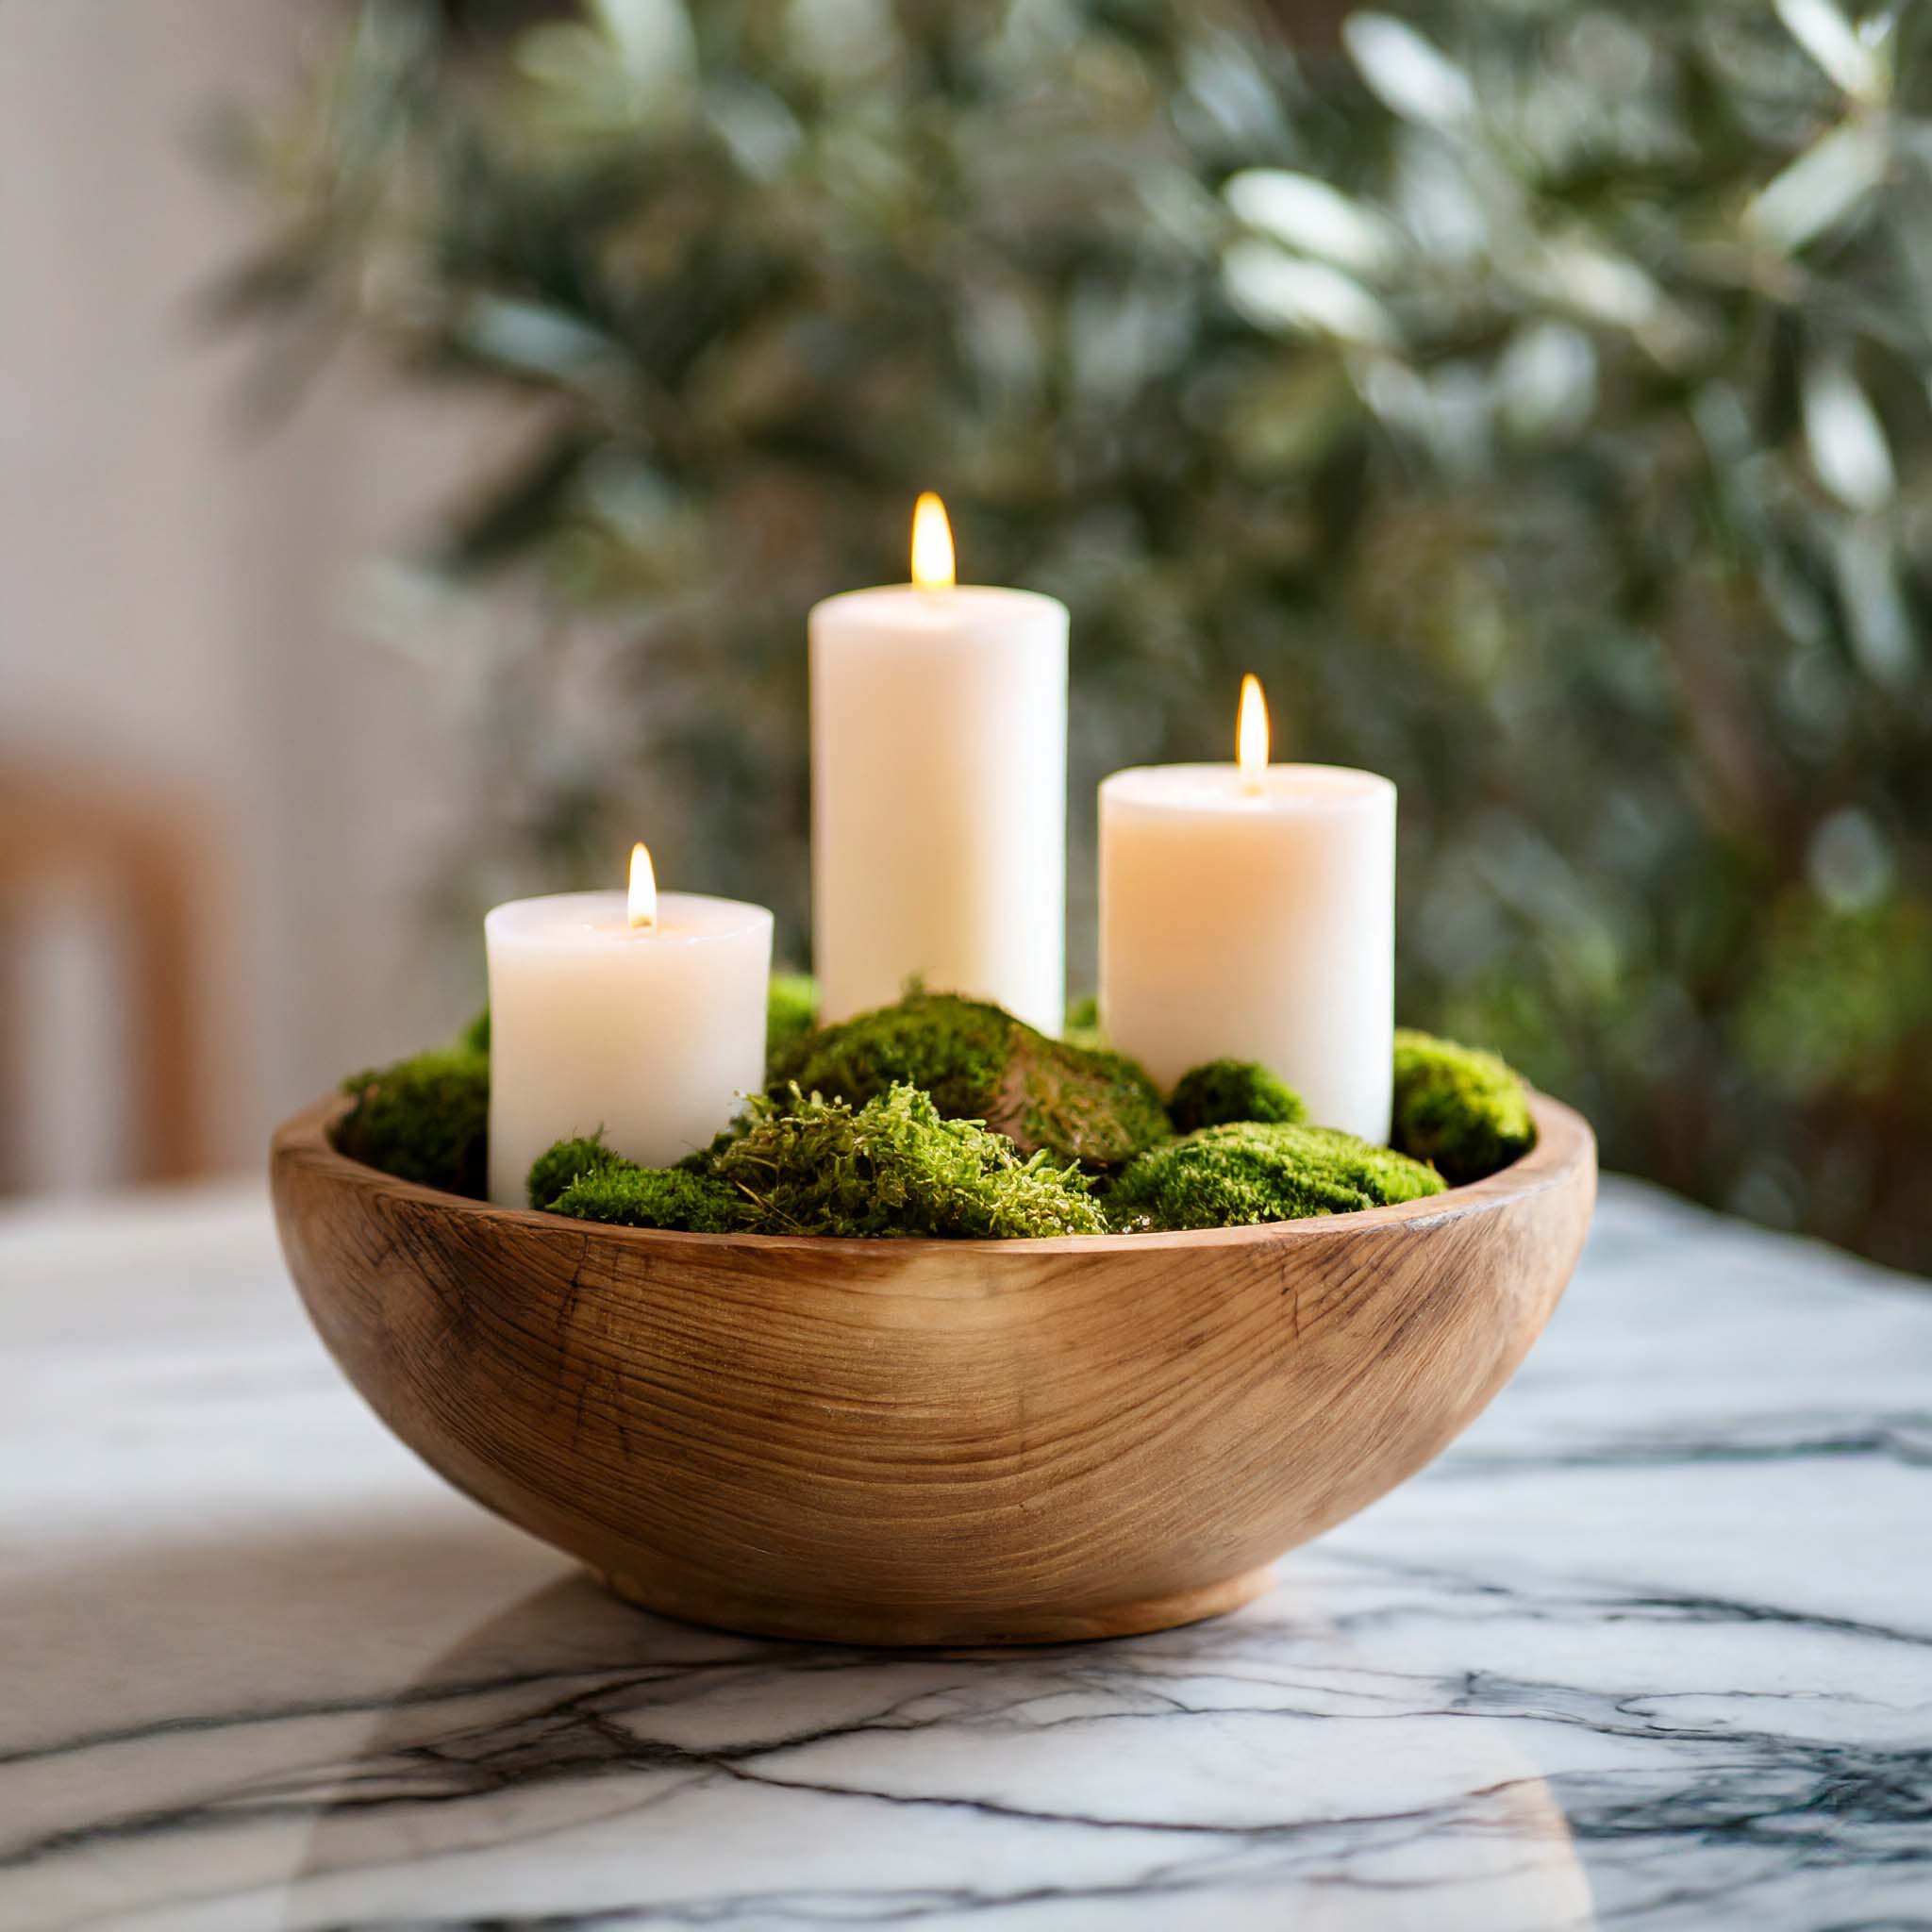 Round wooden dough bowl filled with moss and candles on marble table with olive trees in the background.